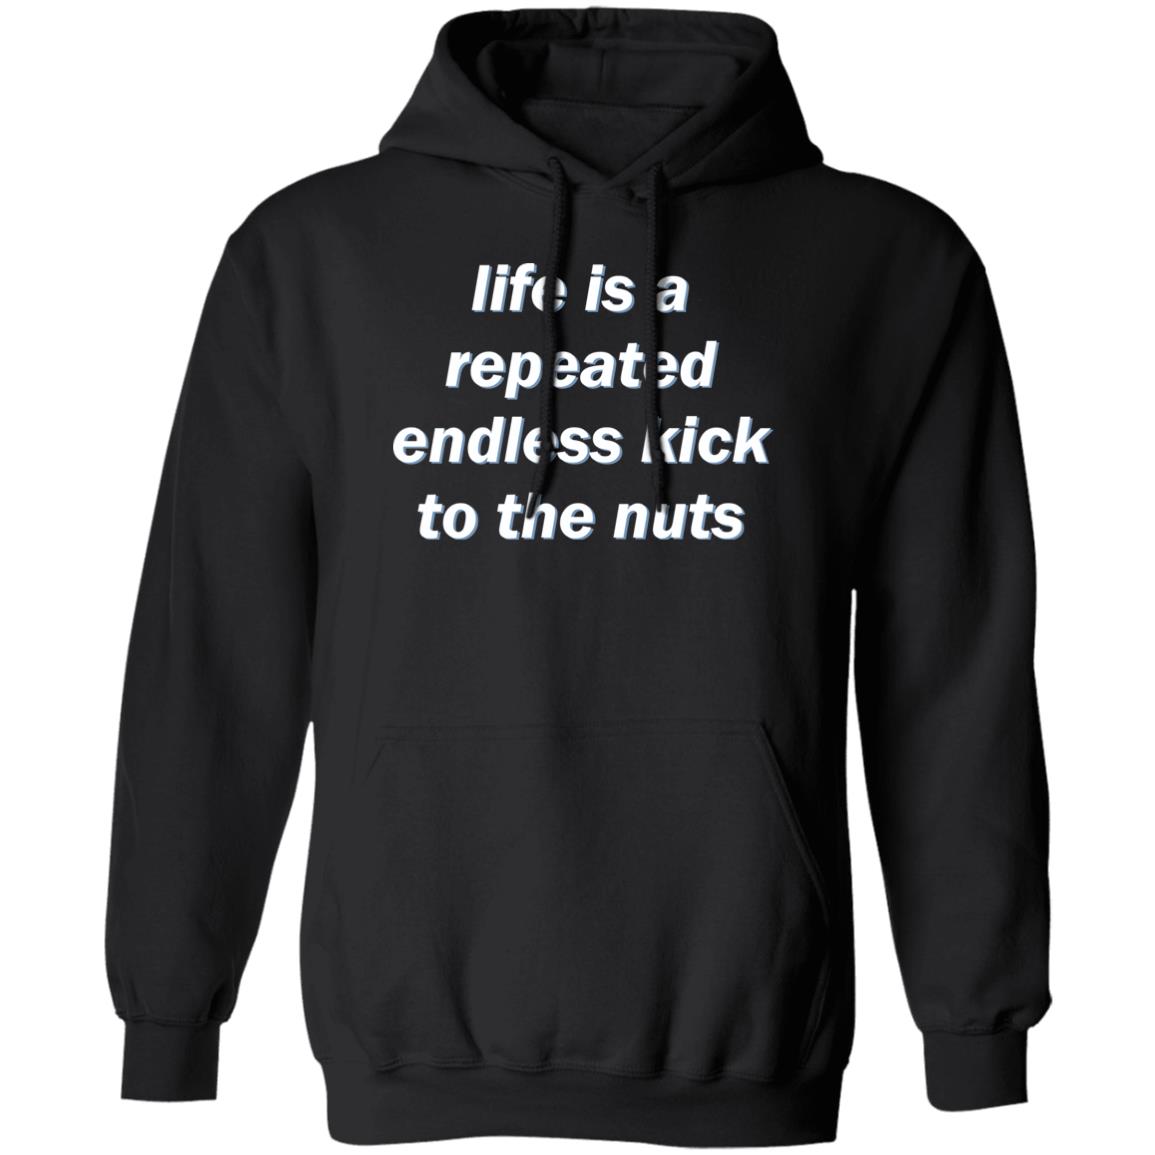 Life Is A Repeated Endless Kick To The Nuts Shirt 1